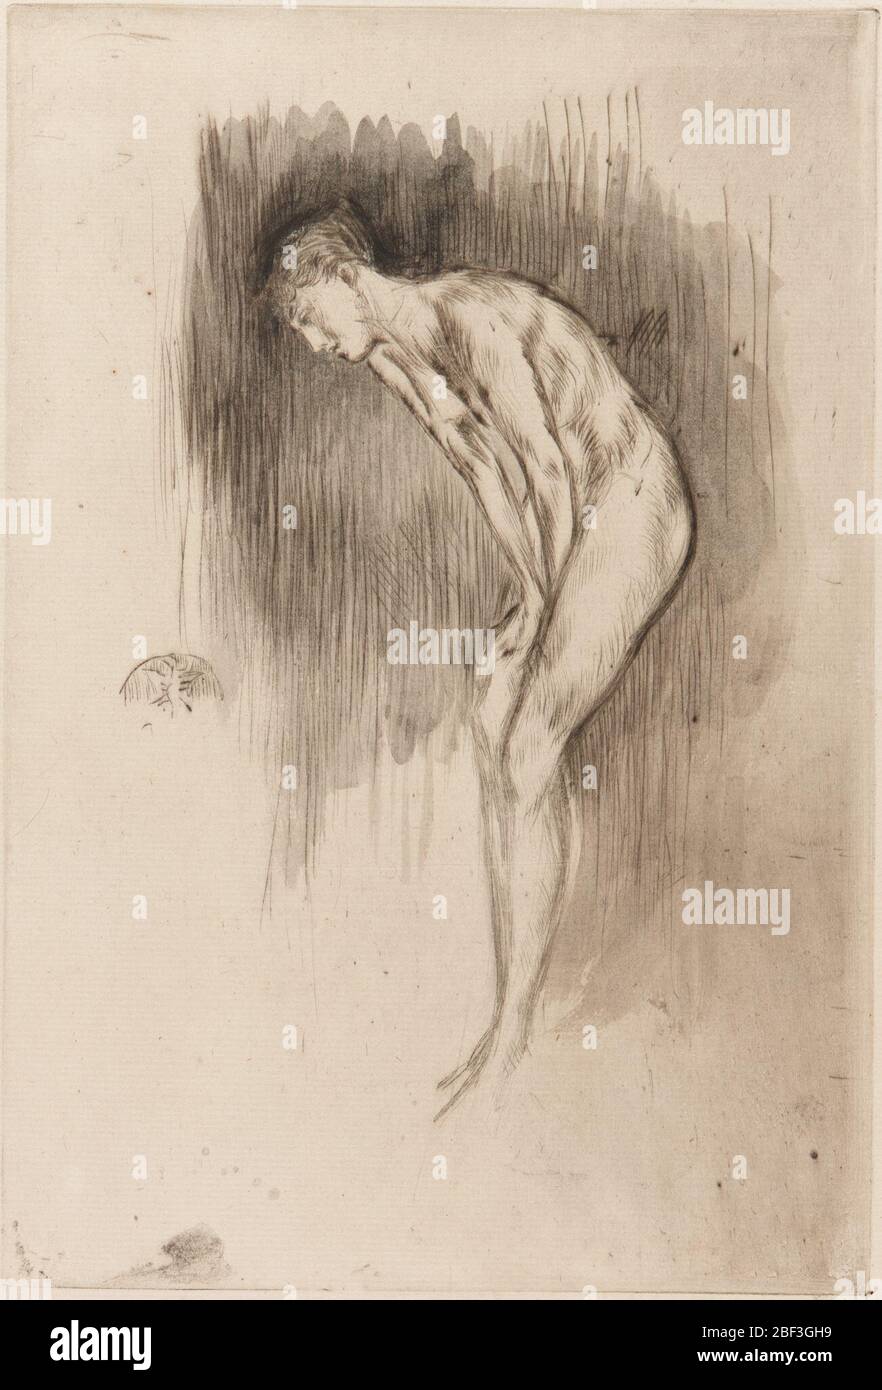 (Artist) James McNeill Whistler; United States; 1873; Drypoint on paper; H x W: 23.4 x 15.9 cm (9 3/16 x 6 1/4 in); Gift of Charles Lang Freer Stock Photo